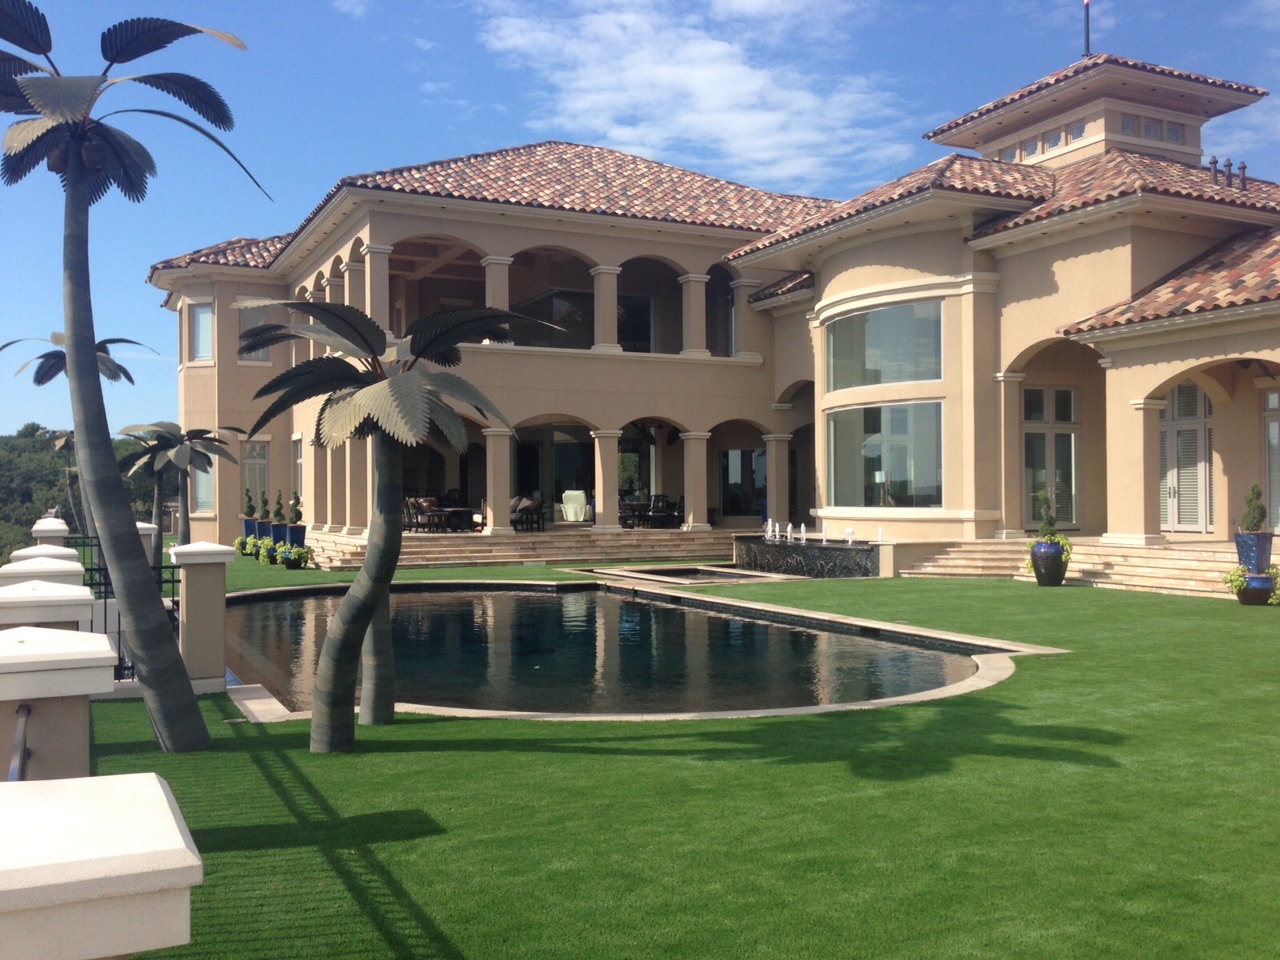 Artificial grass backyard installation from SYNLawn